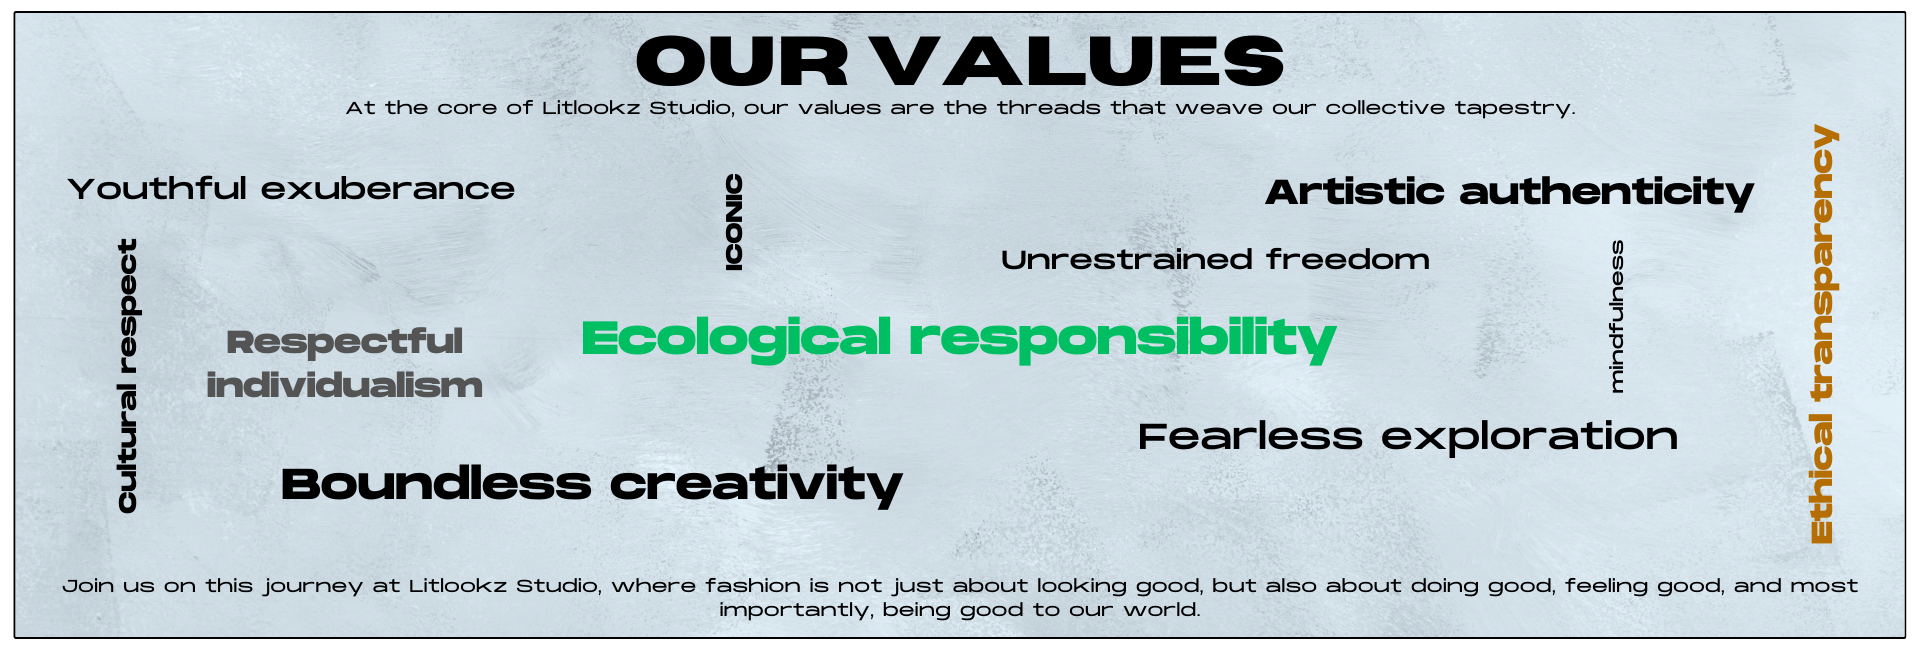 our-values-mobile-2.png